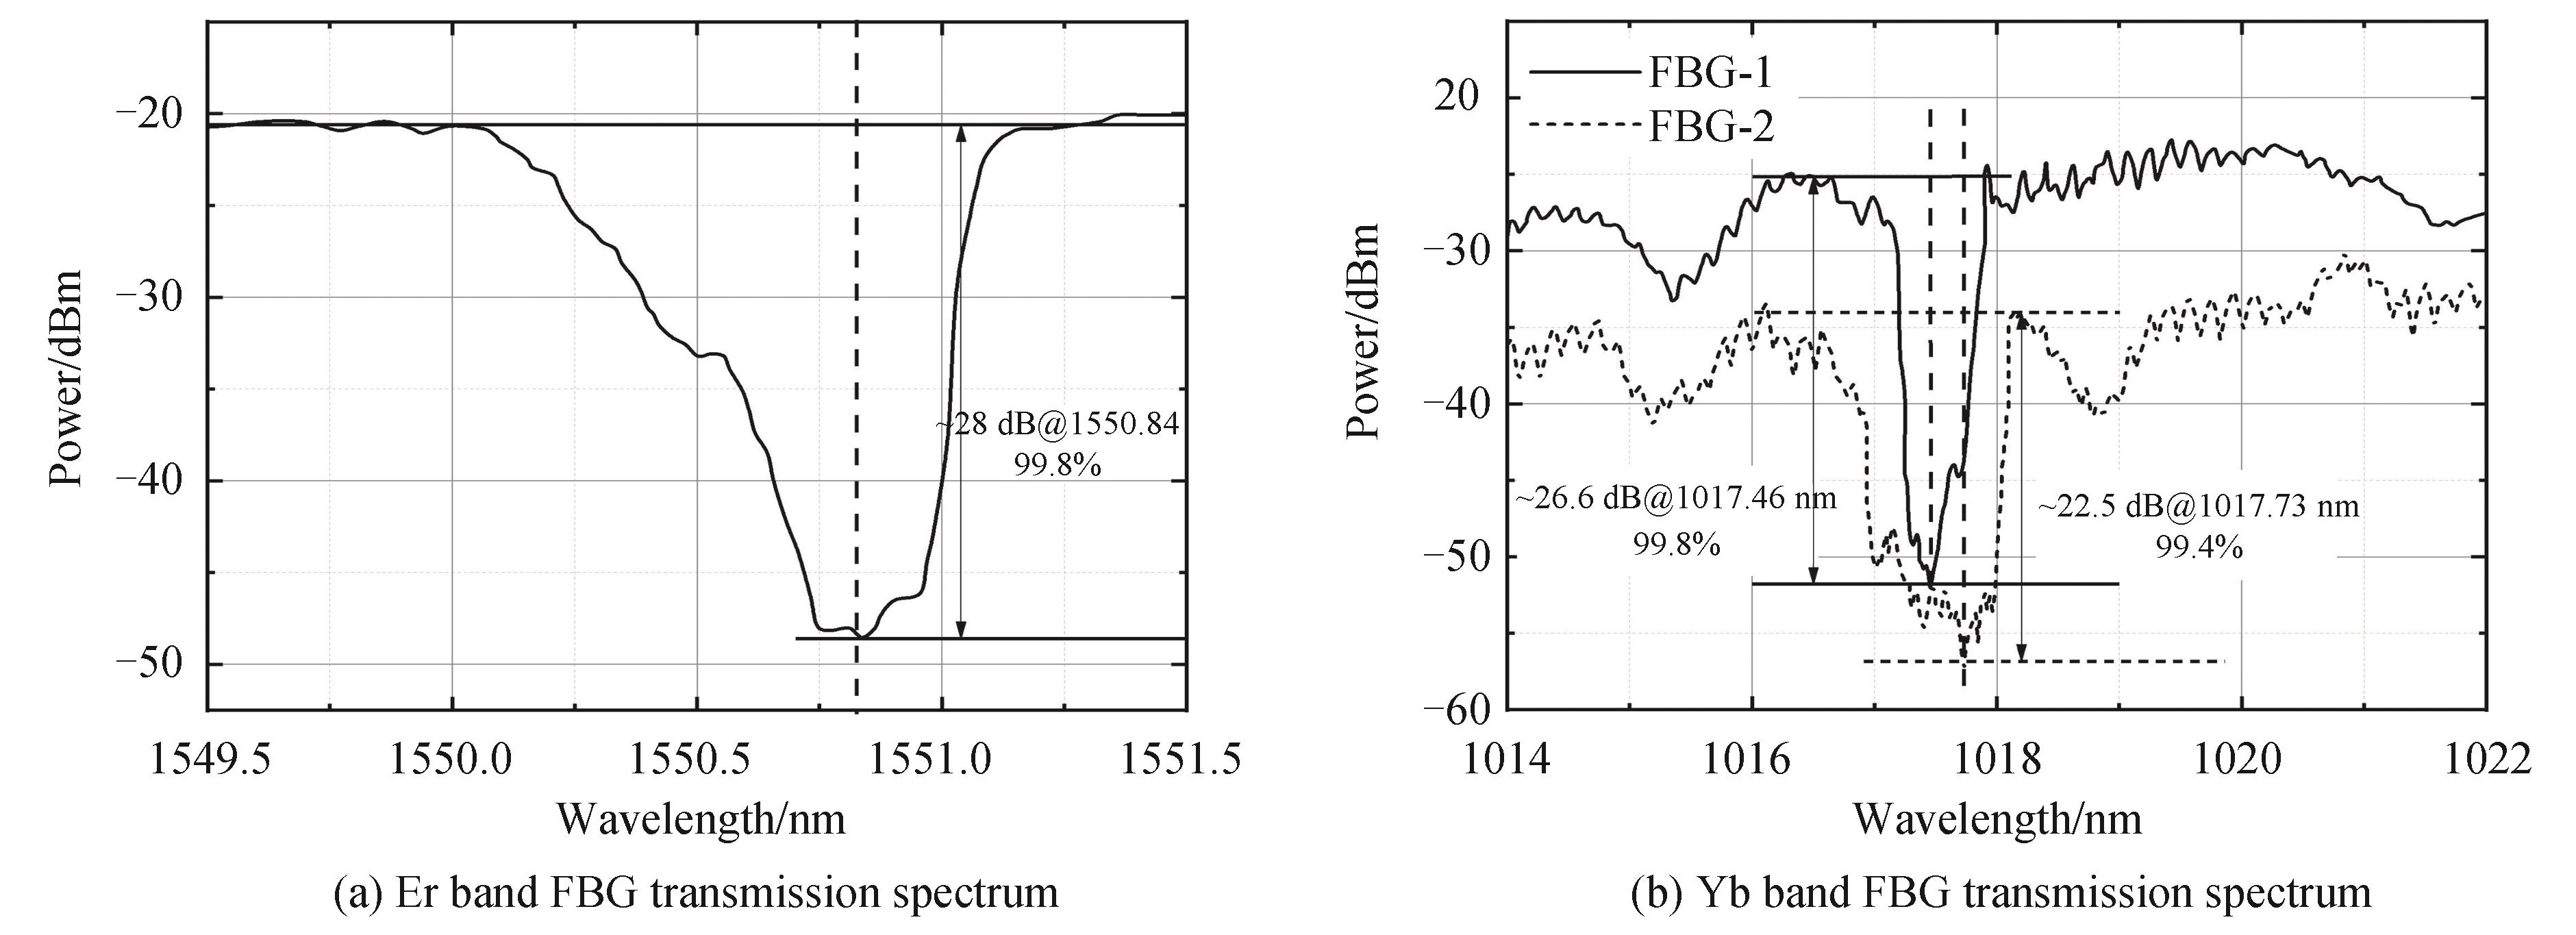 FBG transmission spectrum used in the experiment